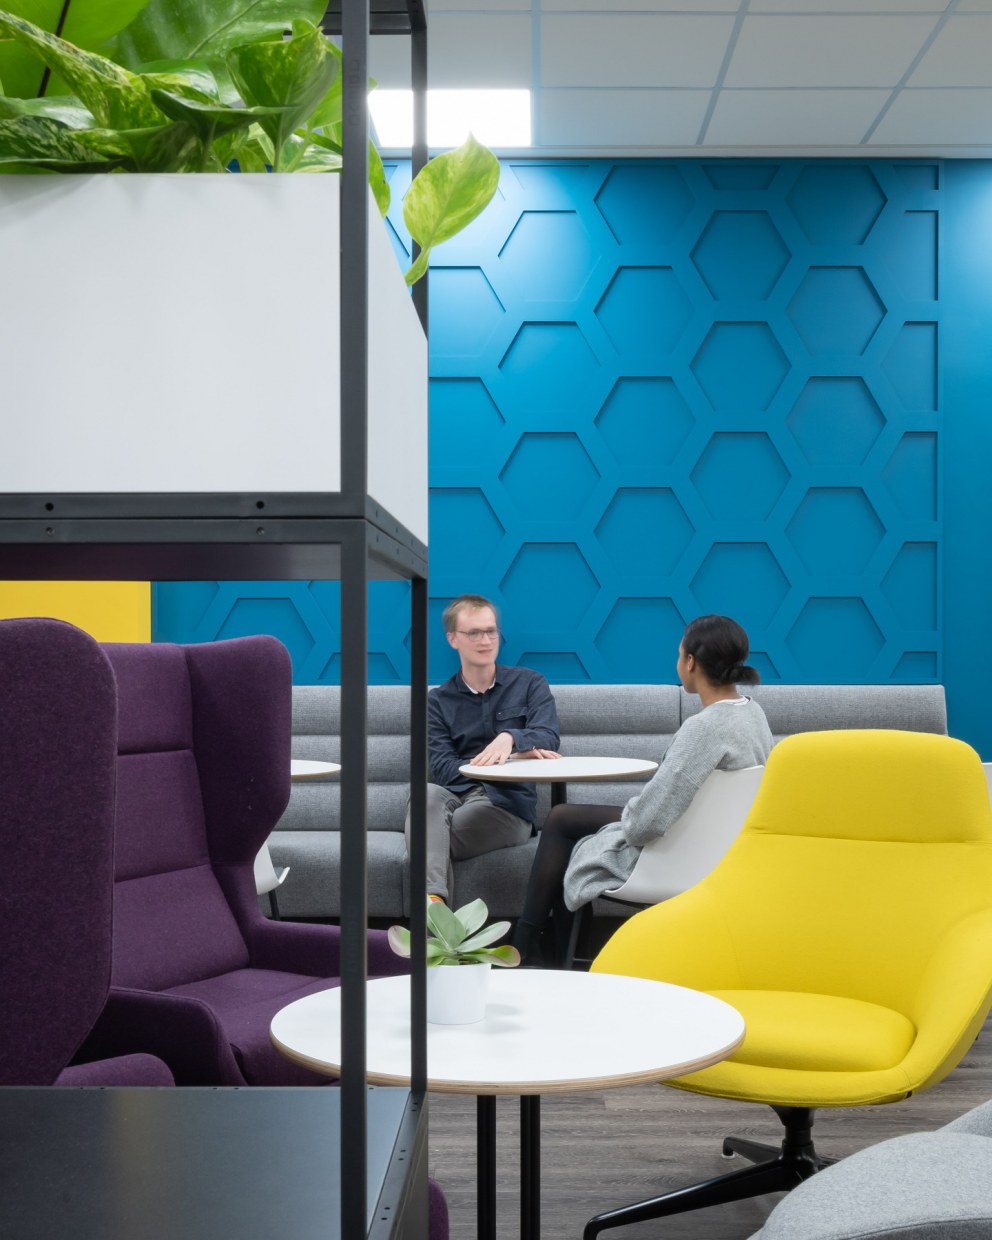 Rethink Events - Workplace Design | Breakout area - feature wall & banquette seating | Interior Designers